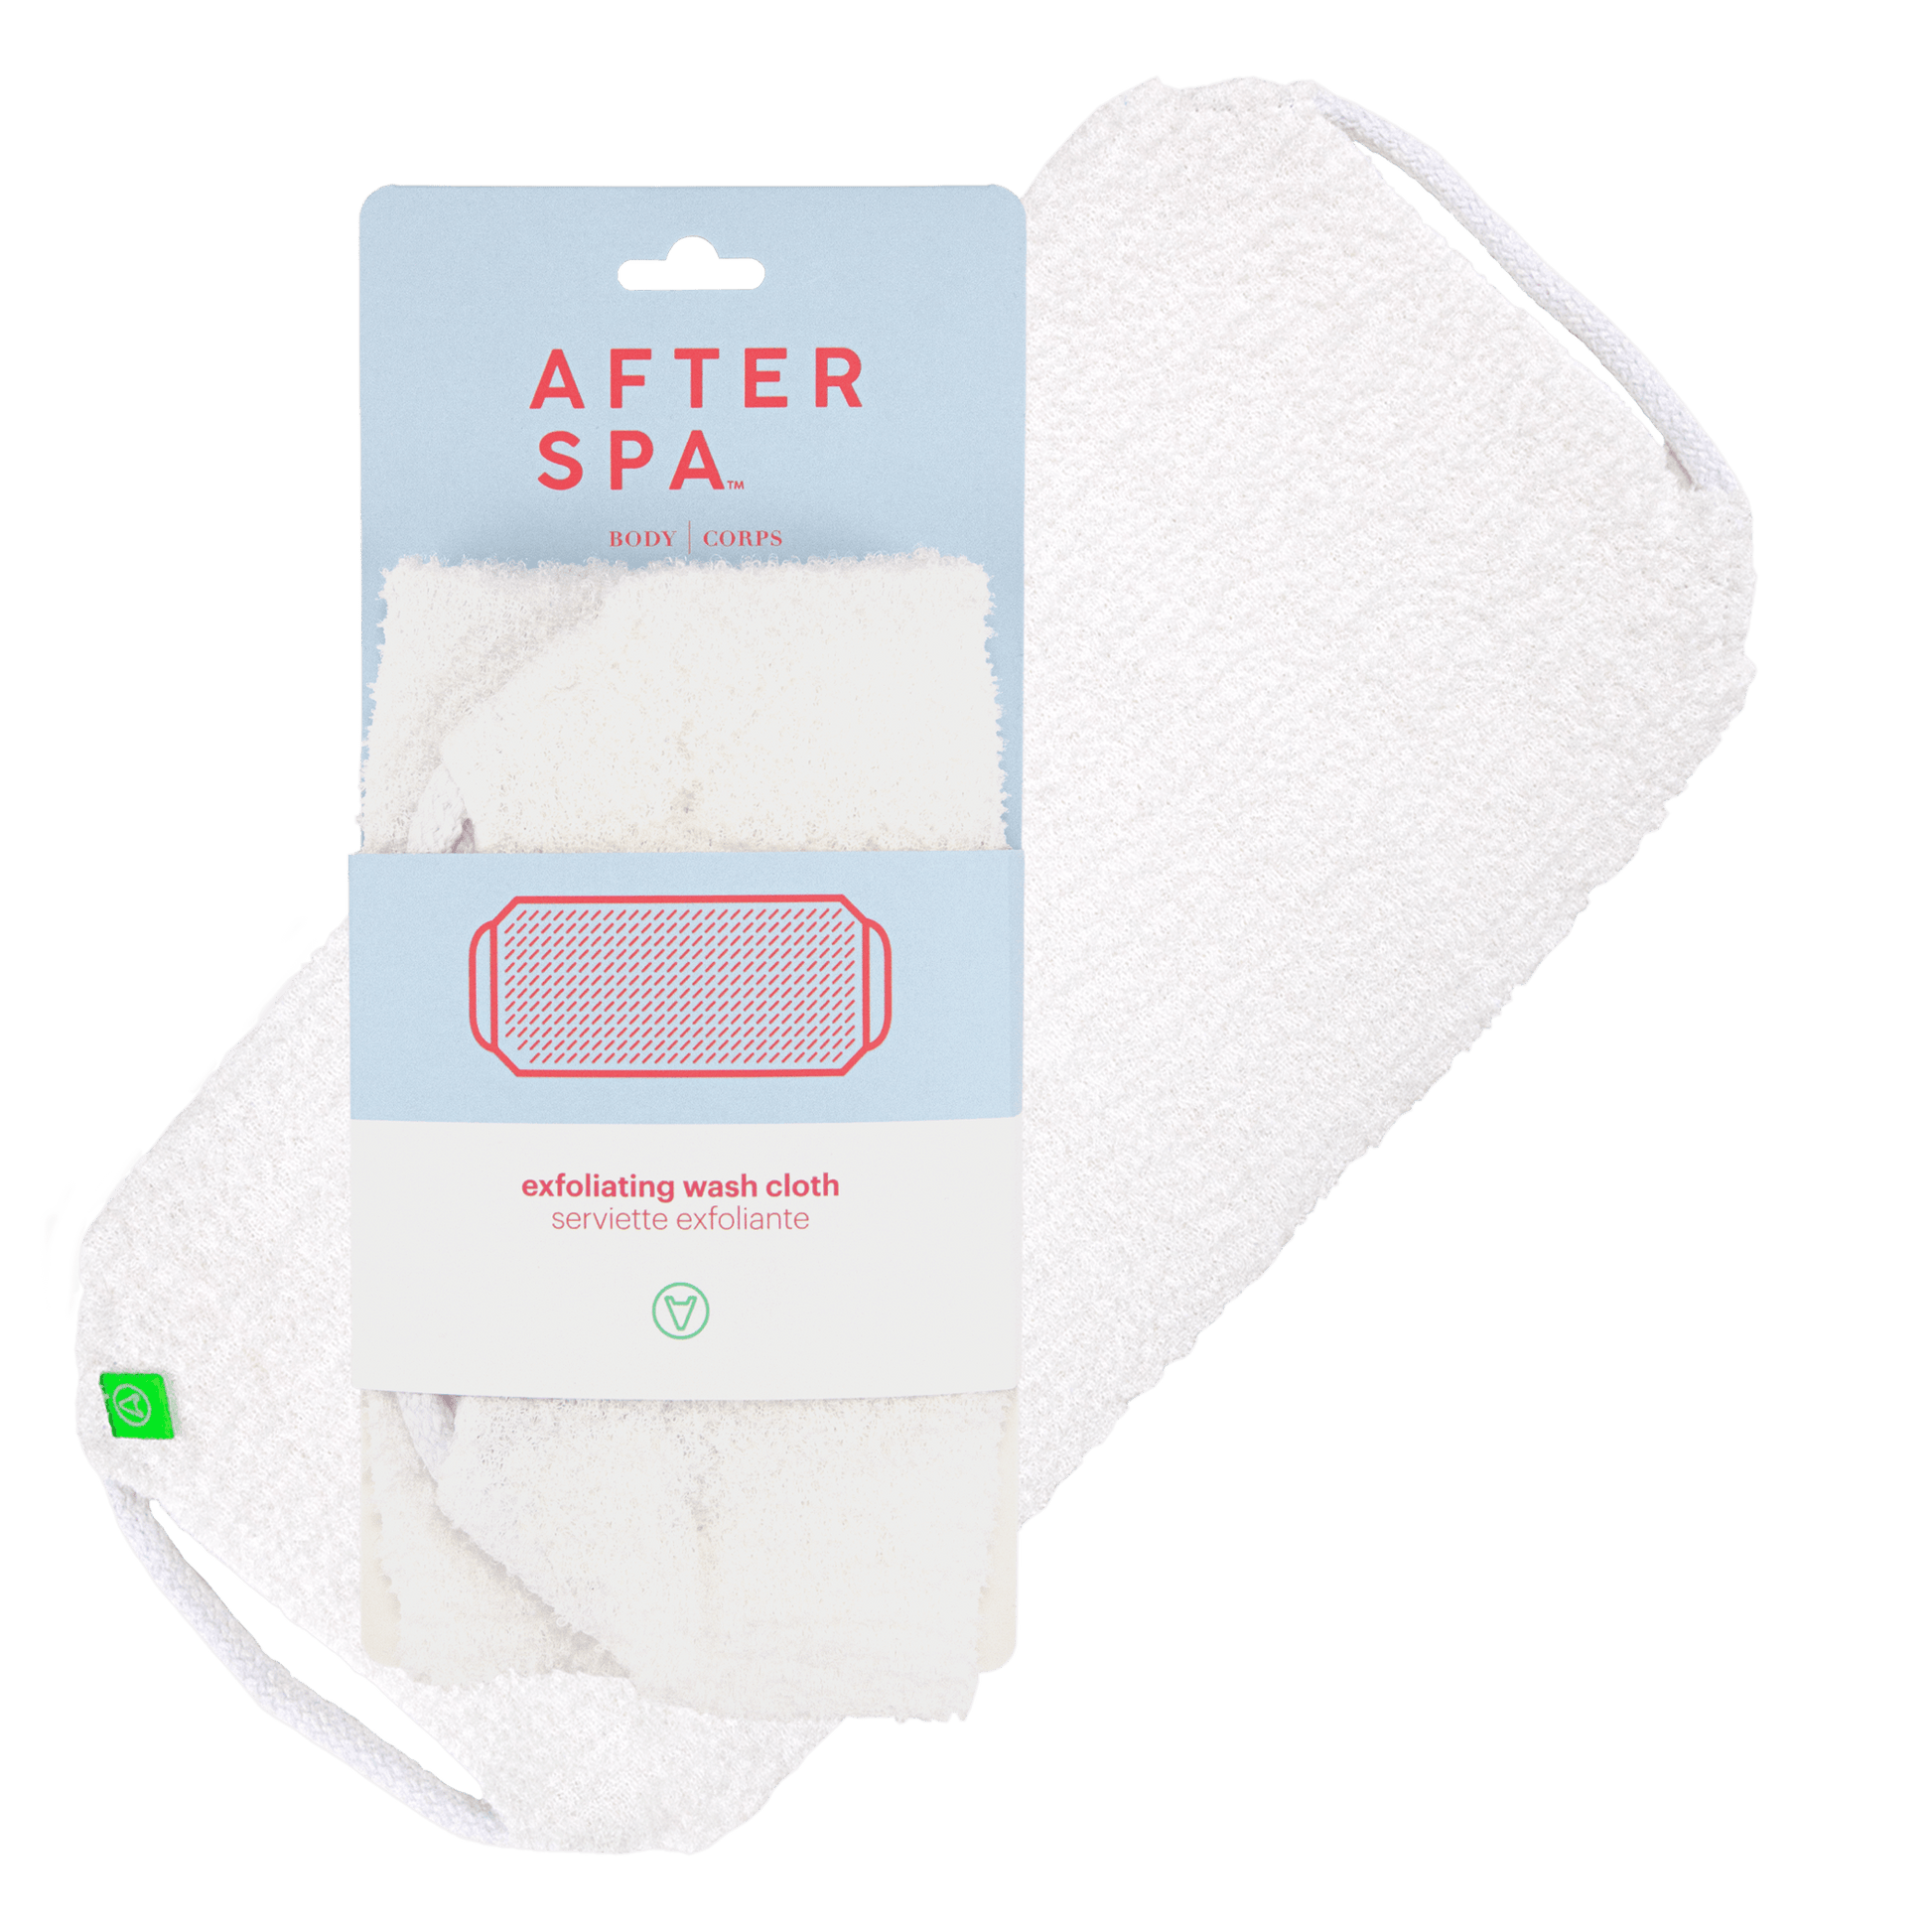 Exfoliating Wash Cloth by Afterspa to cleanse and exfoliate the bodyExfoliating Wash Cloth by Afterspa to cleanse and exfoliate the body